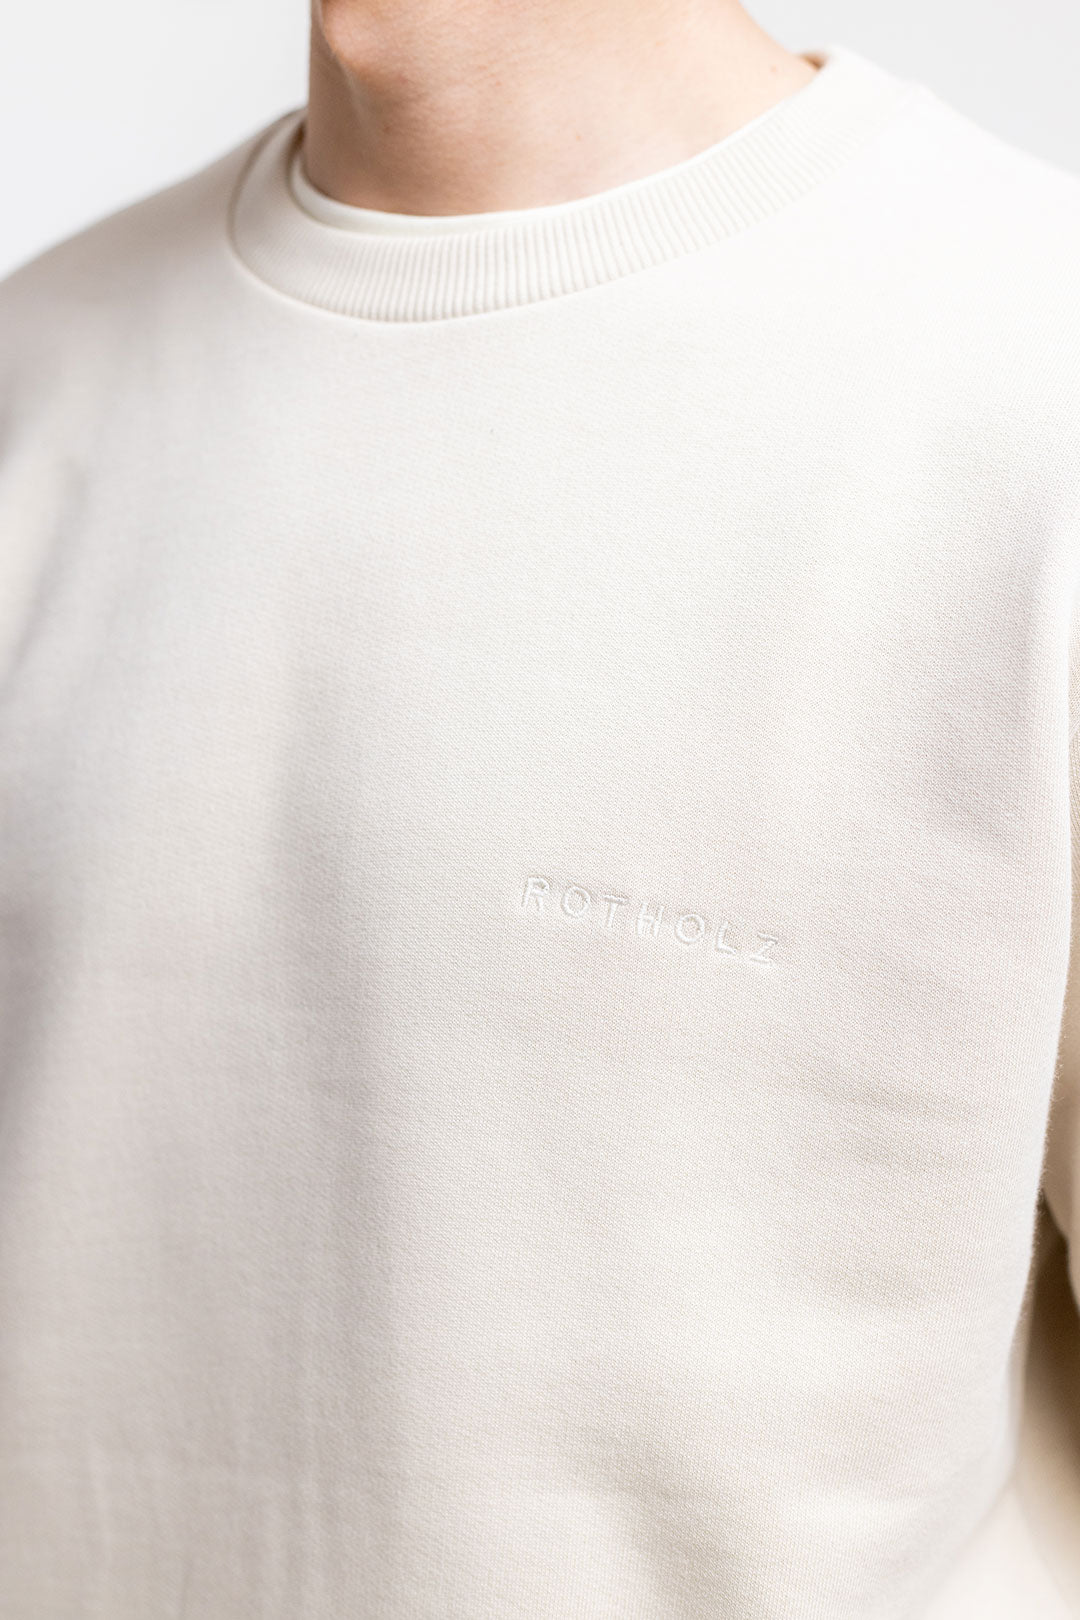 Beige sweatshirt logo made from 100% organic cotton from Rotholz